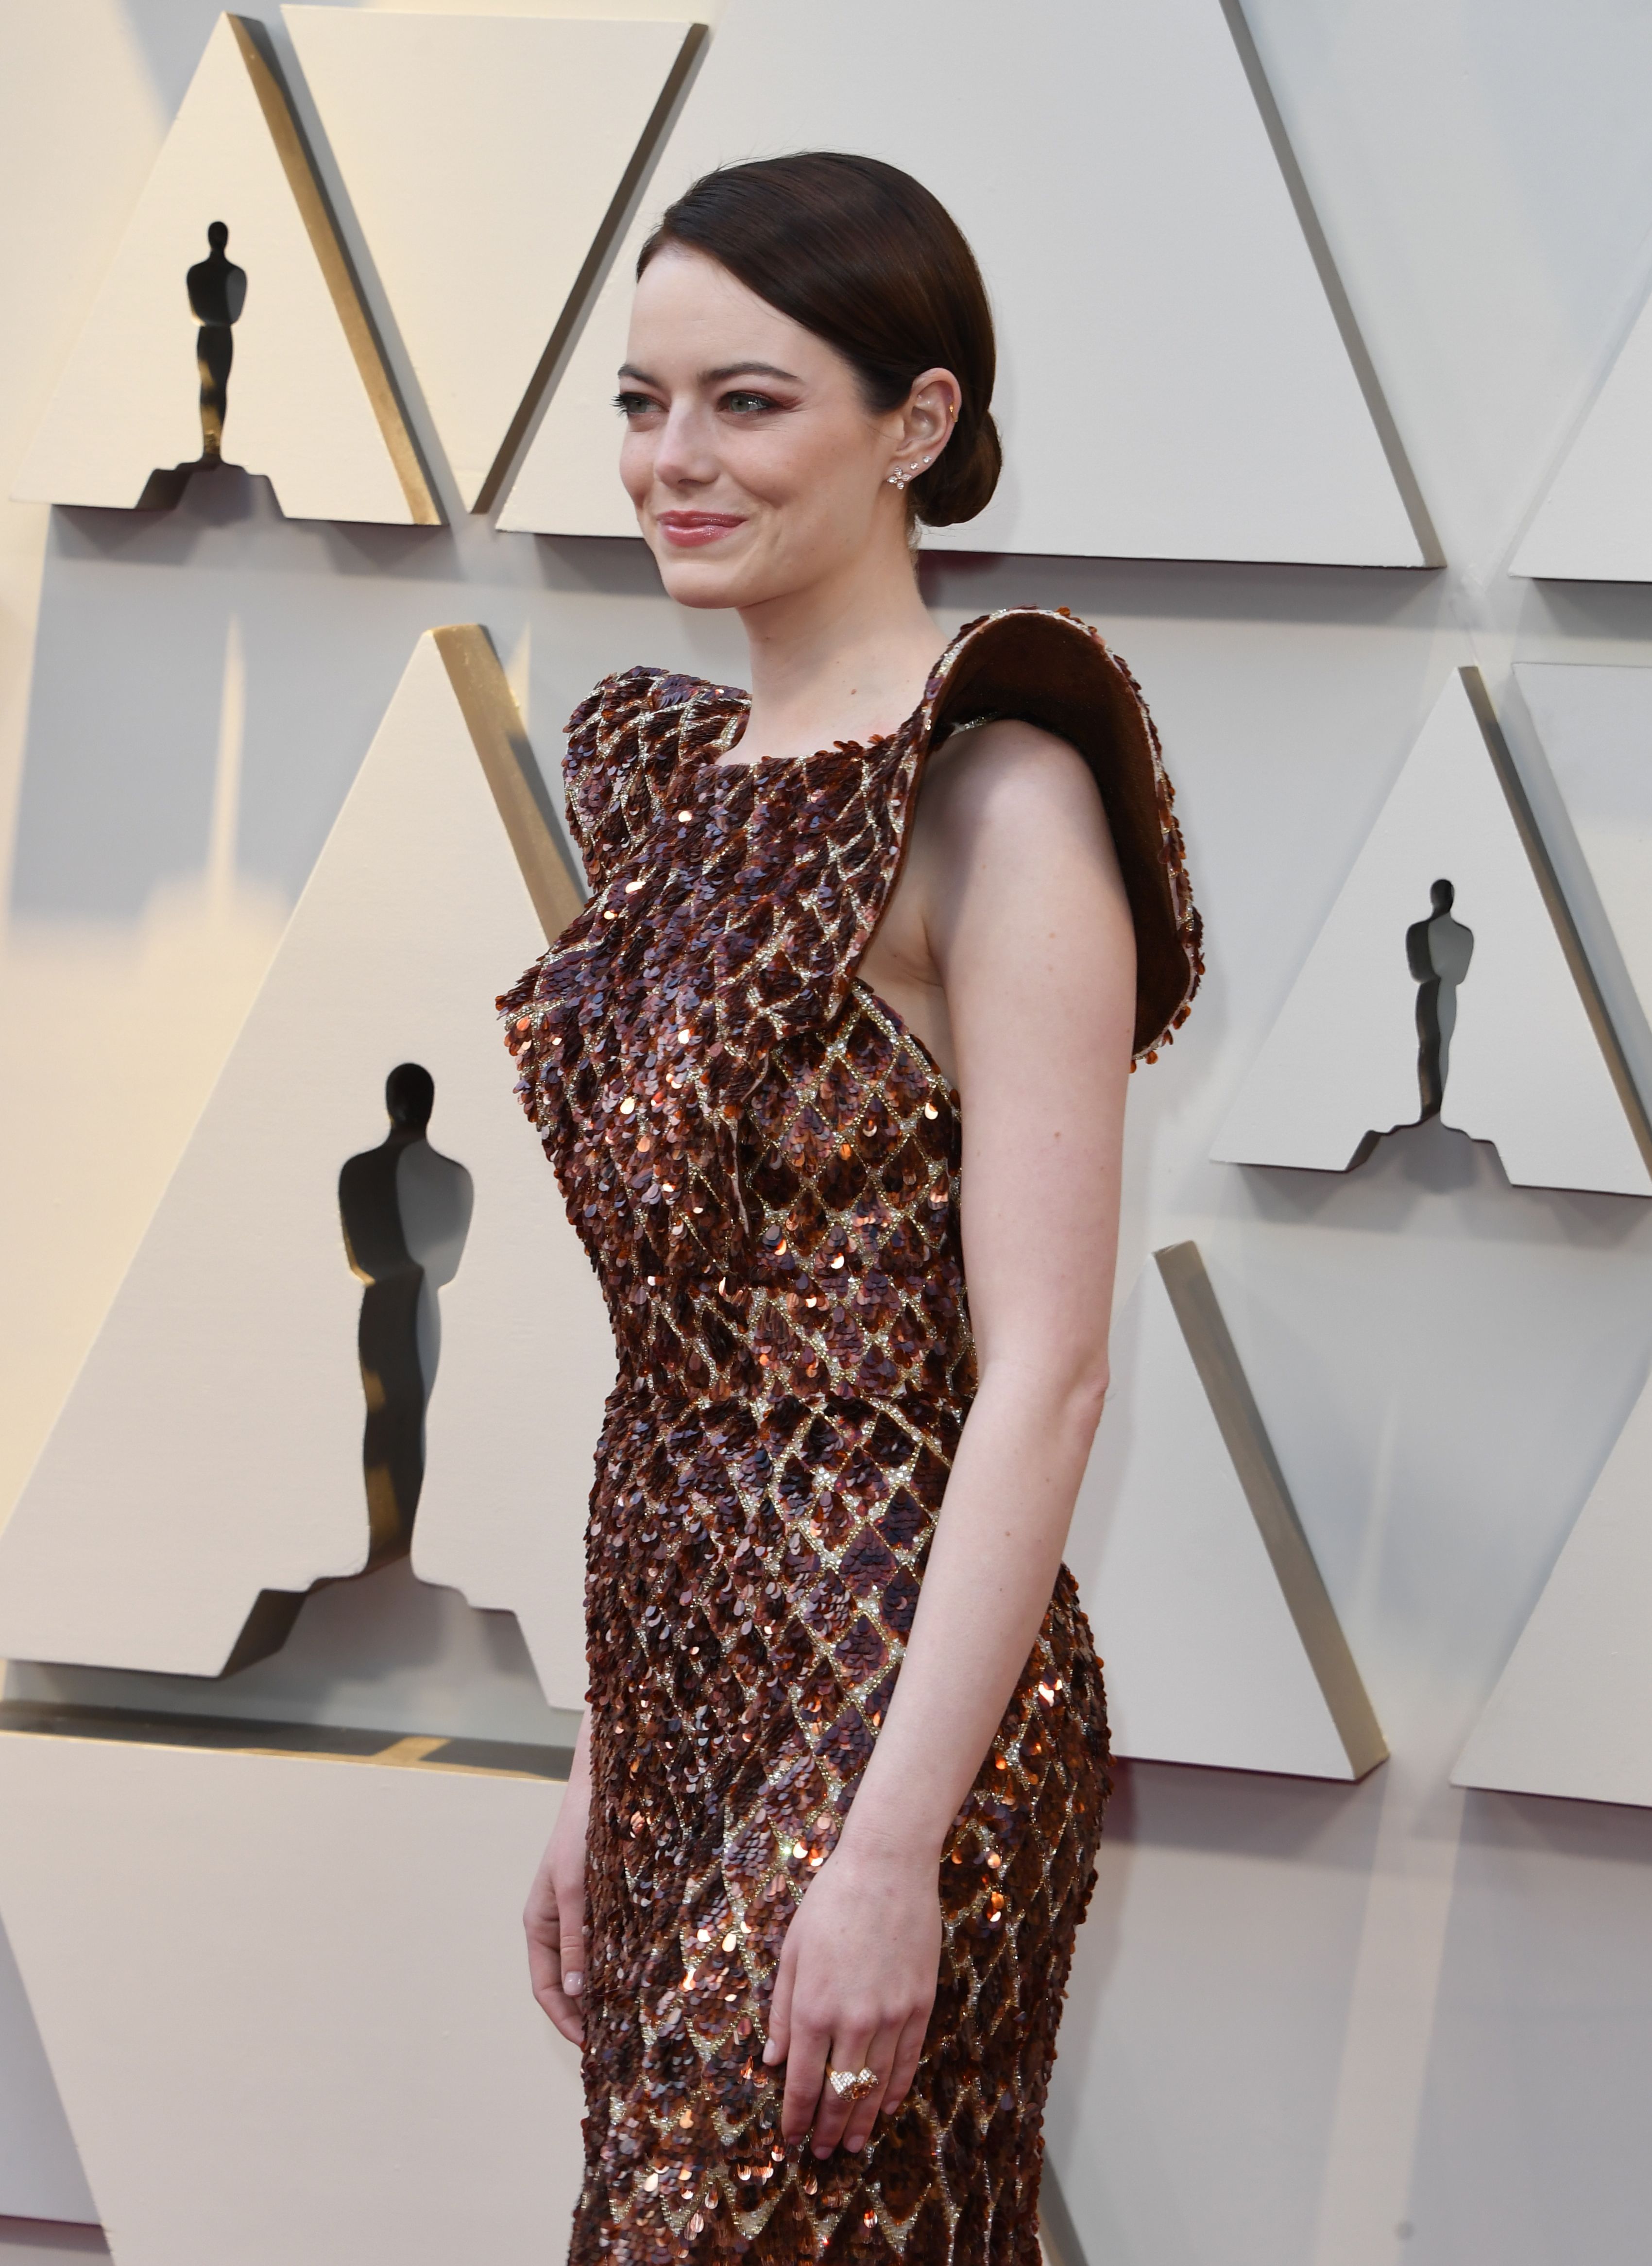 Emma Stone S 19 Oscar Dress Looks Like A Honey Comb The Favourite Actress Red Carpet Outfit